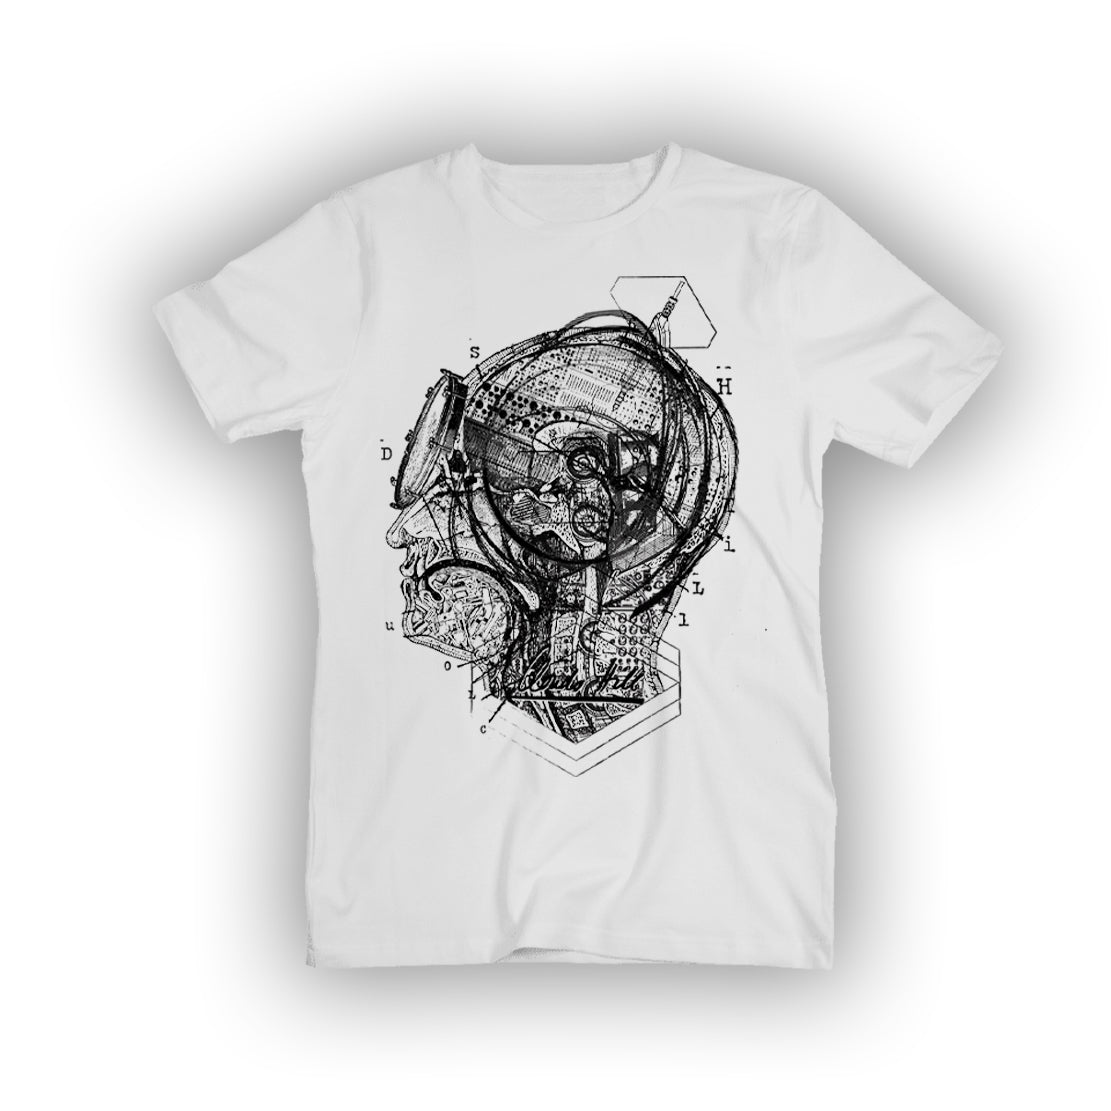 Clouds Hill "Hidden Speculations" - DIVER (White) T-Shirt